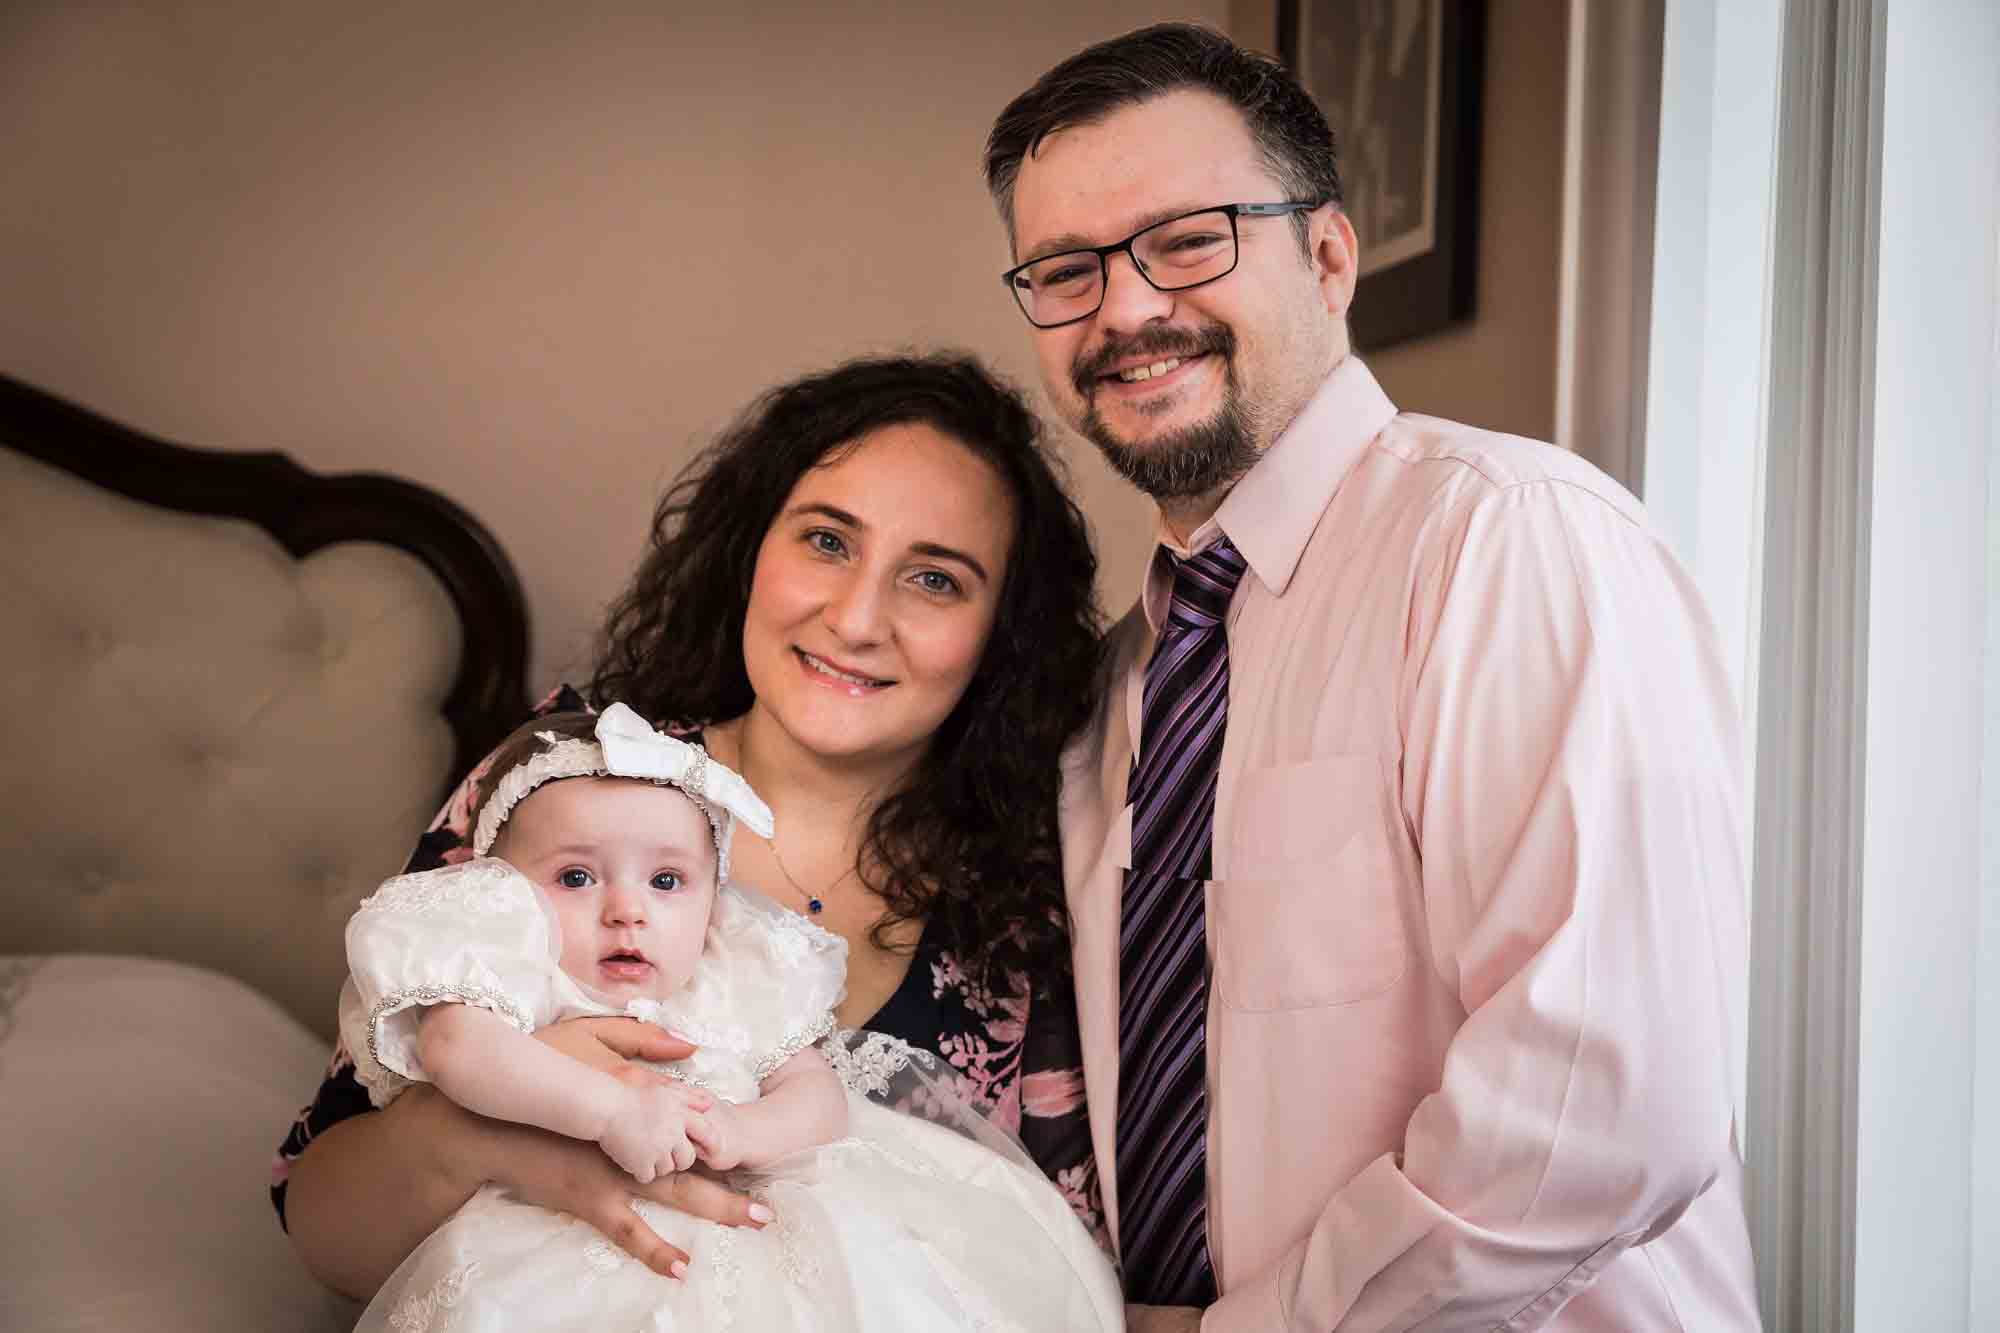 Mother and father holding baby girl wearing white baptism dress and hair bow